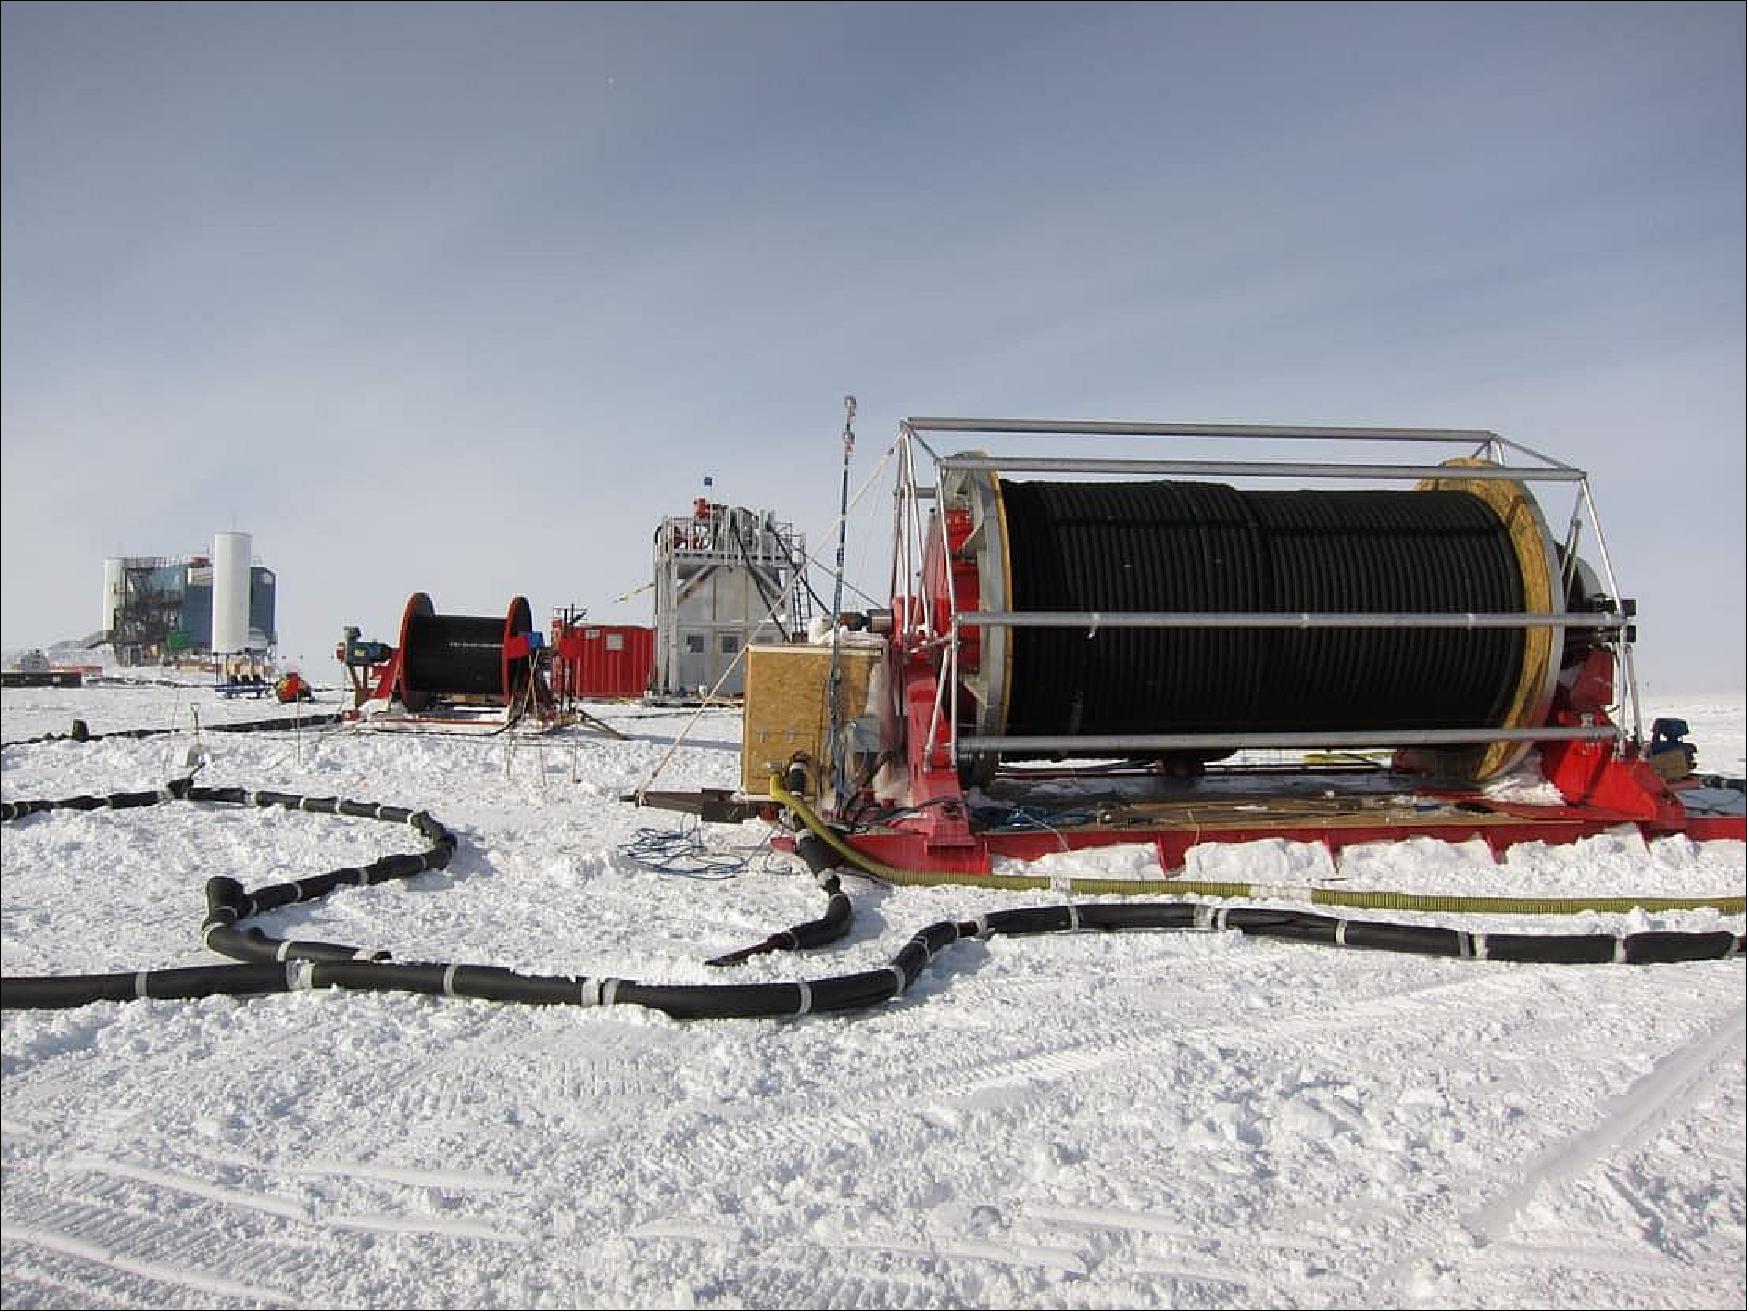 Figure 5: The hose reel, front right, held 2,500 meters of 10 cm diameter high-pressure hose for the drilling operations (image credit: J. Haugen/NSF)